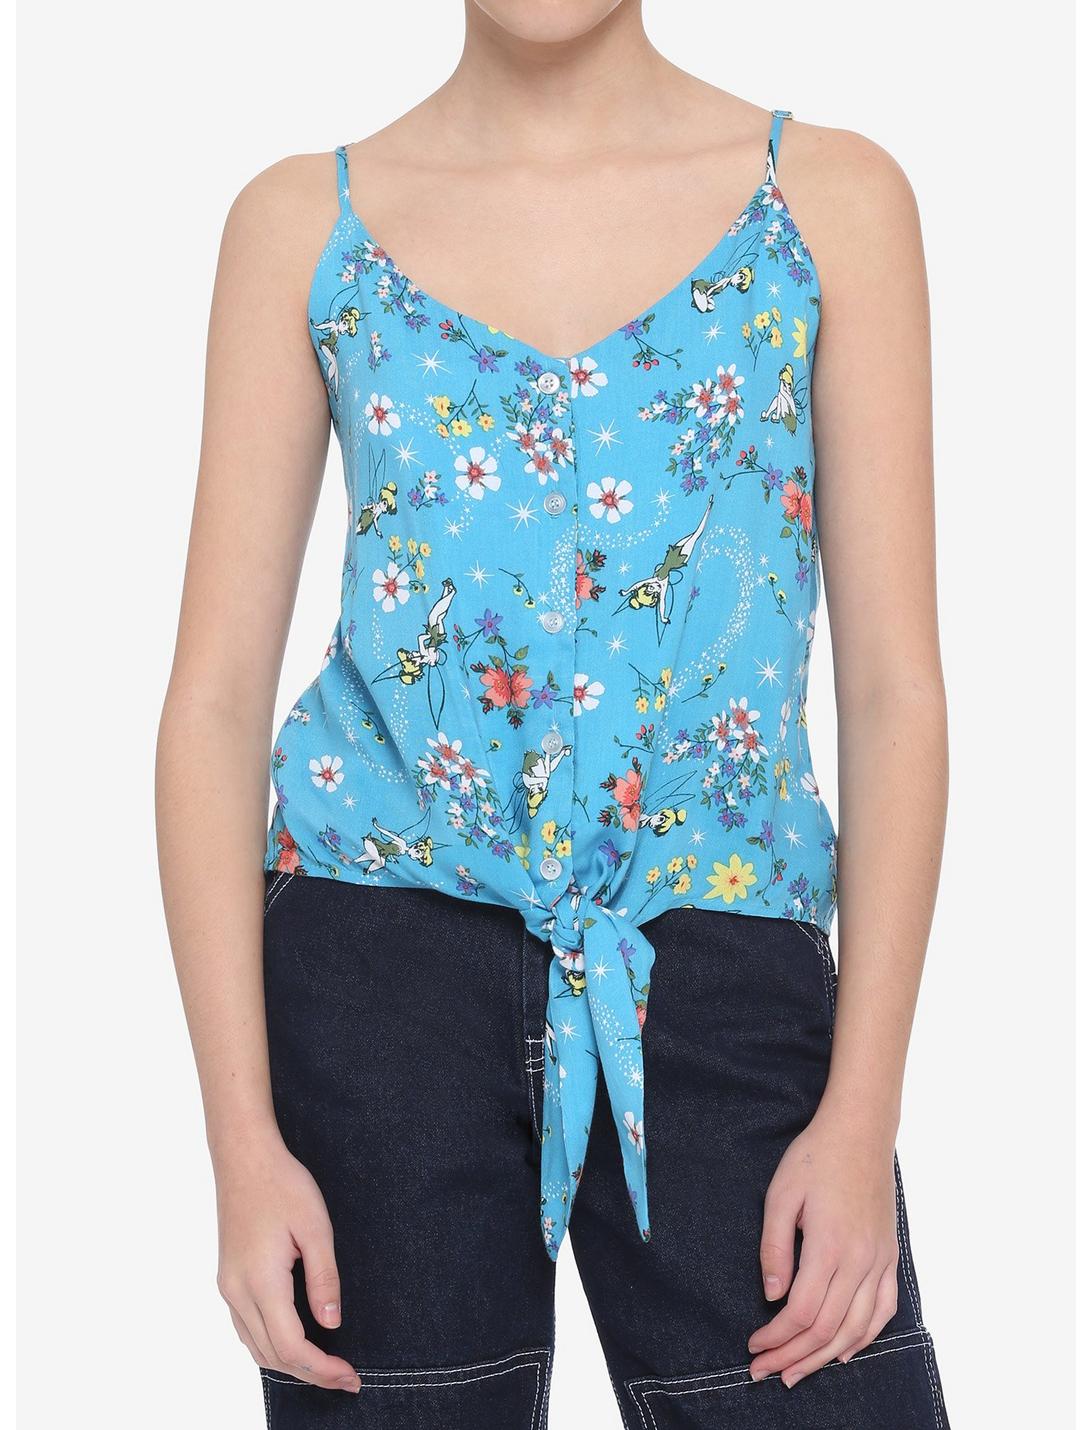 Disney Peter Pan Tinker Bell Strappy Tie-Front Girls Woven Button-Up Tank Top, MULTI, hi-res